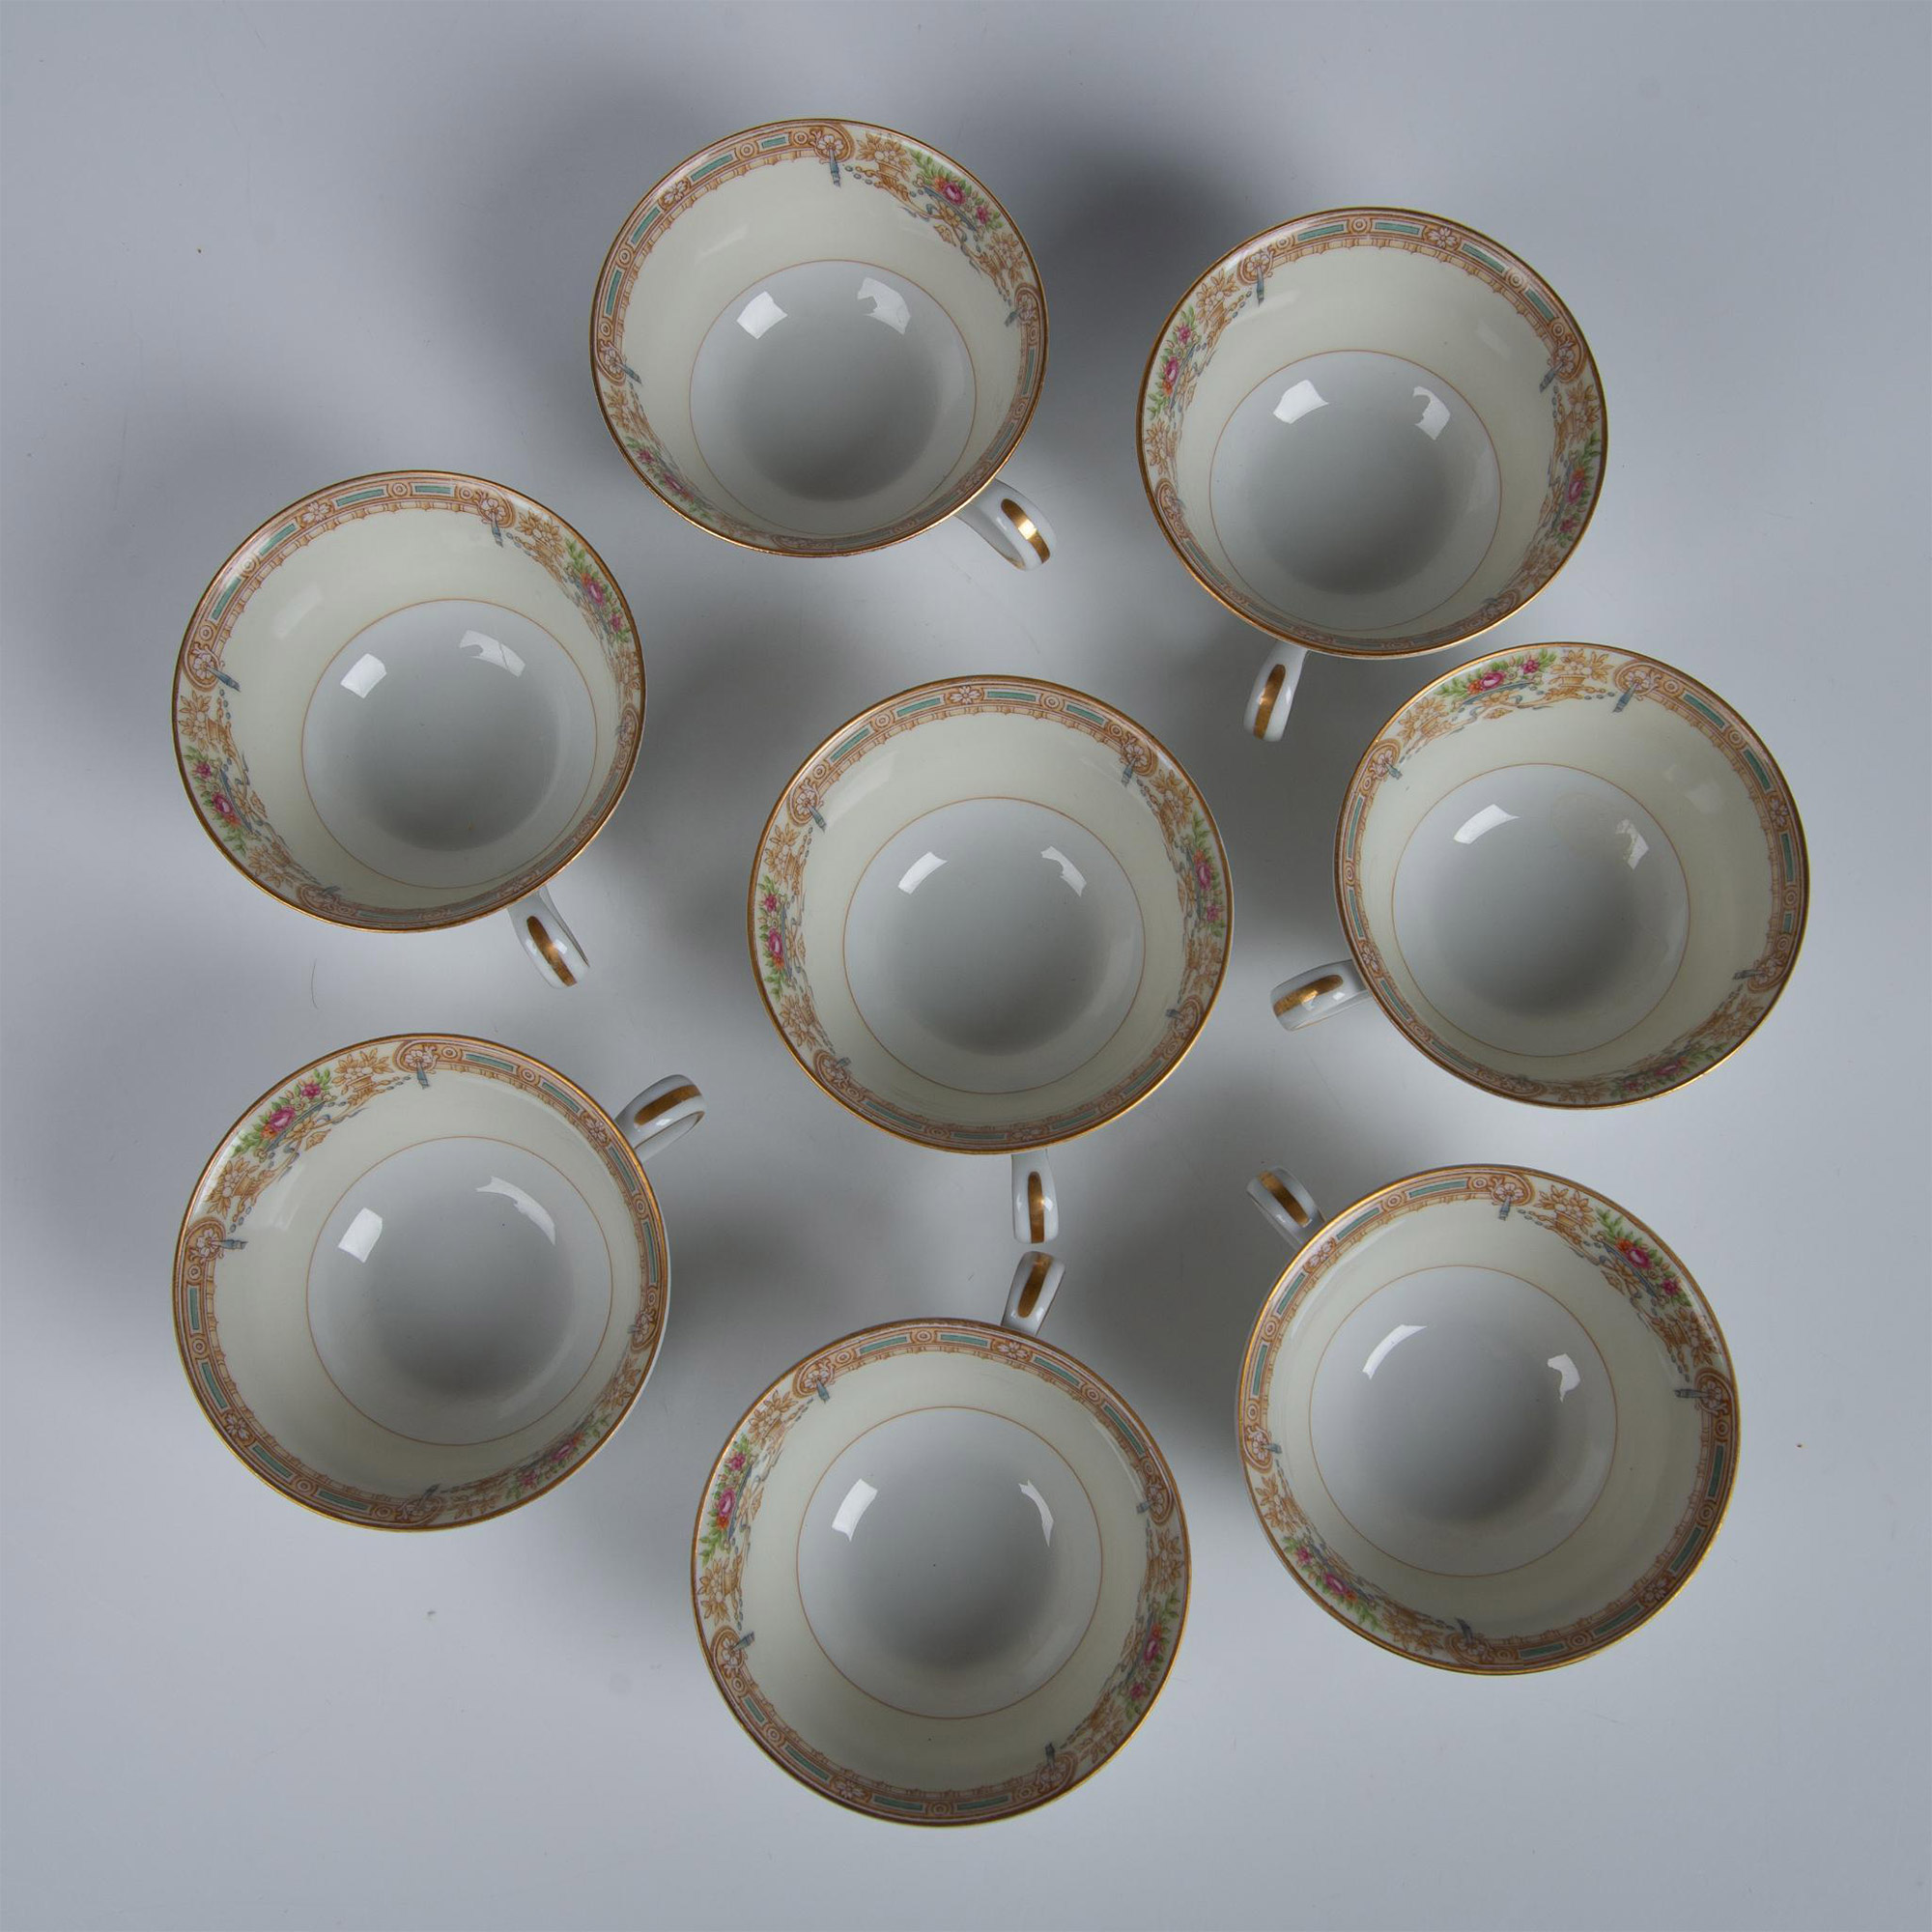 55 pc Vintage Noritake China Dinner Service for 8, Sonora - Image 10 of 11